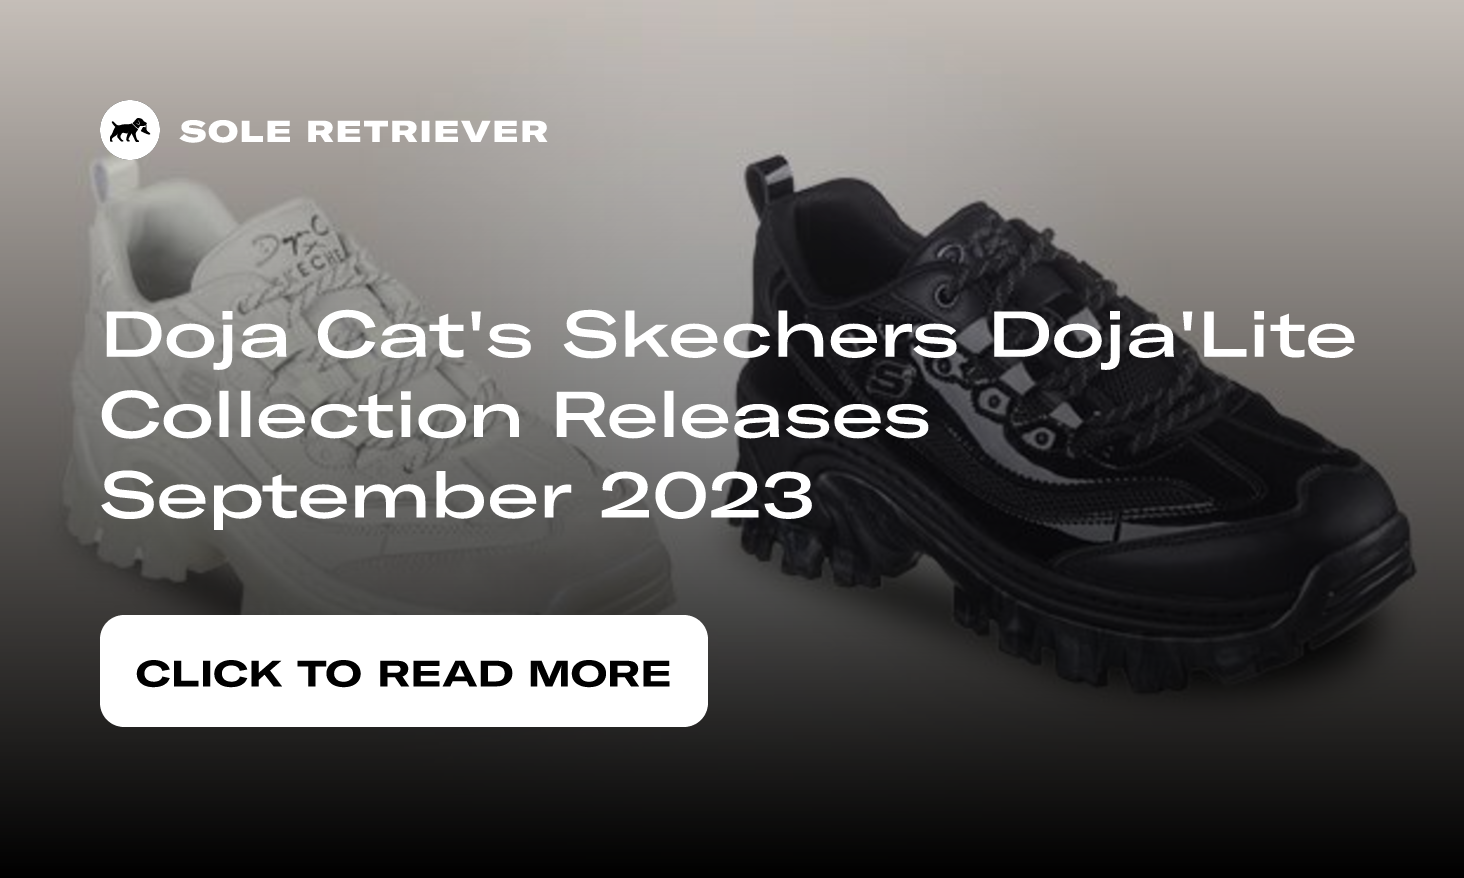 The Skechers x Doja Cat Collaboration Is Here